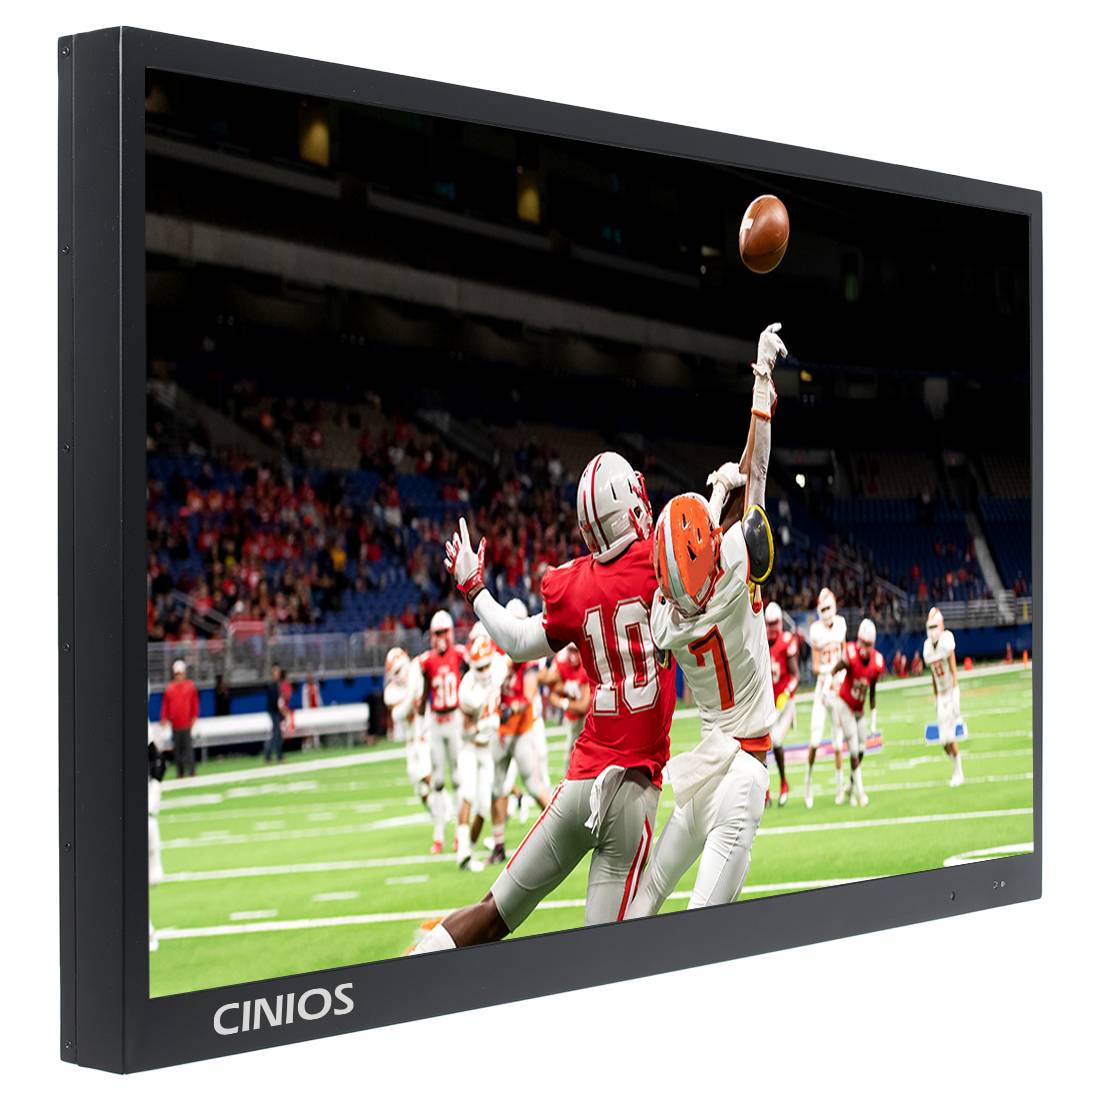 43 inch Cinios 4K outdoor TV with football sports on the screen